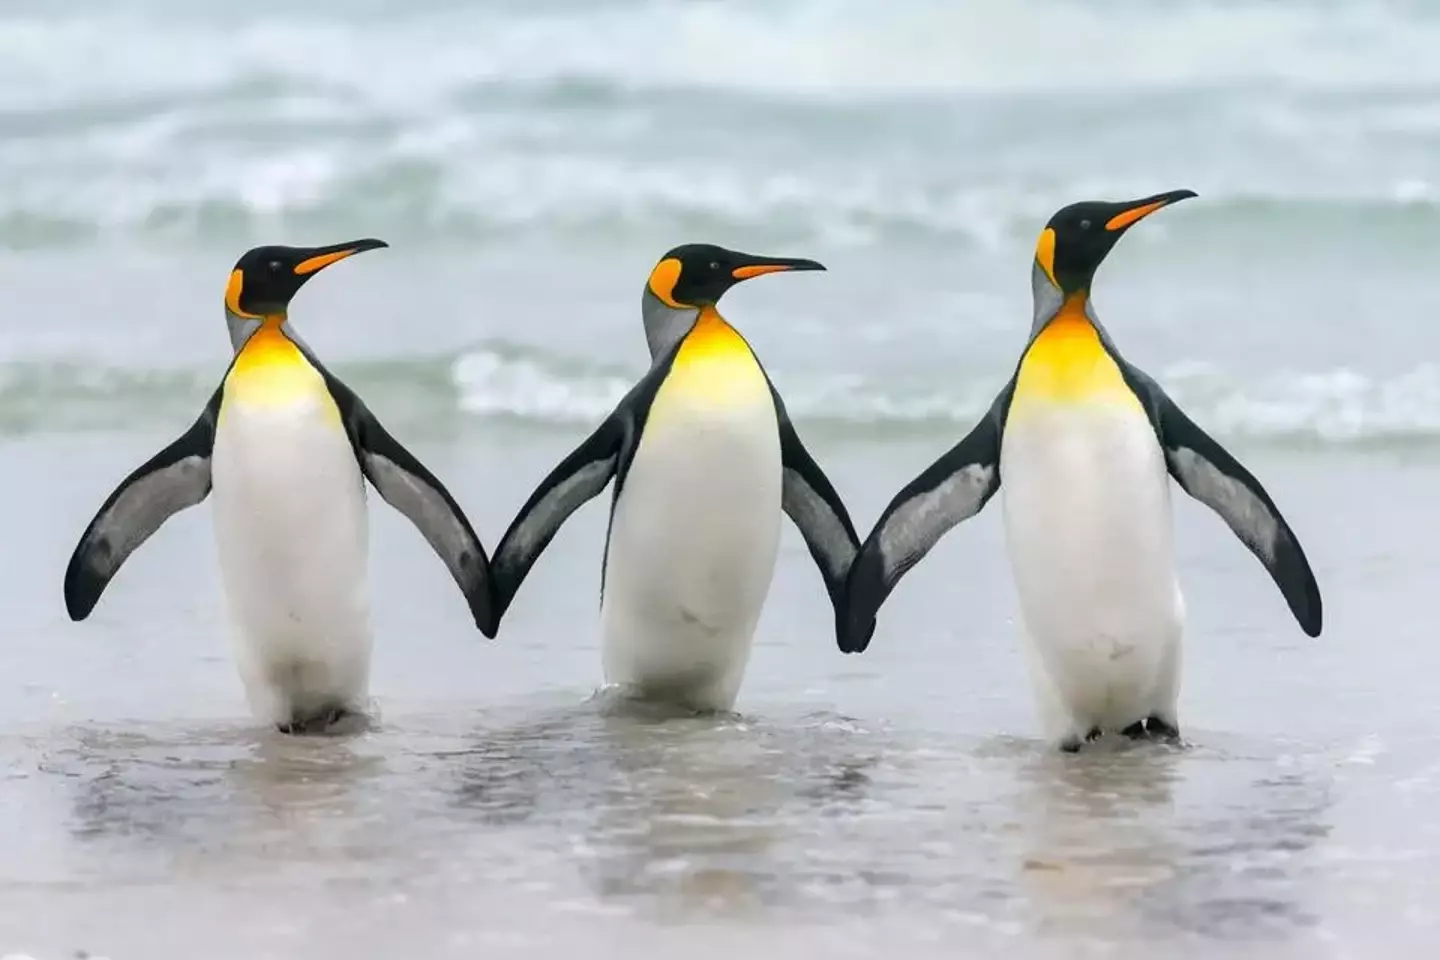 Just three penguins living their best lives.